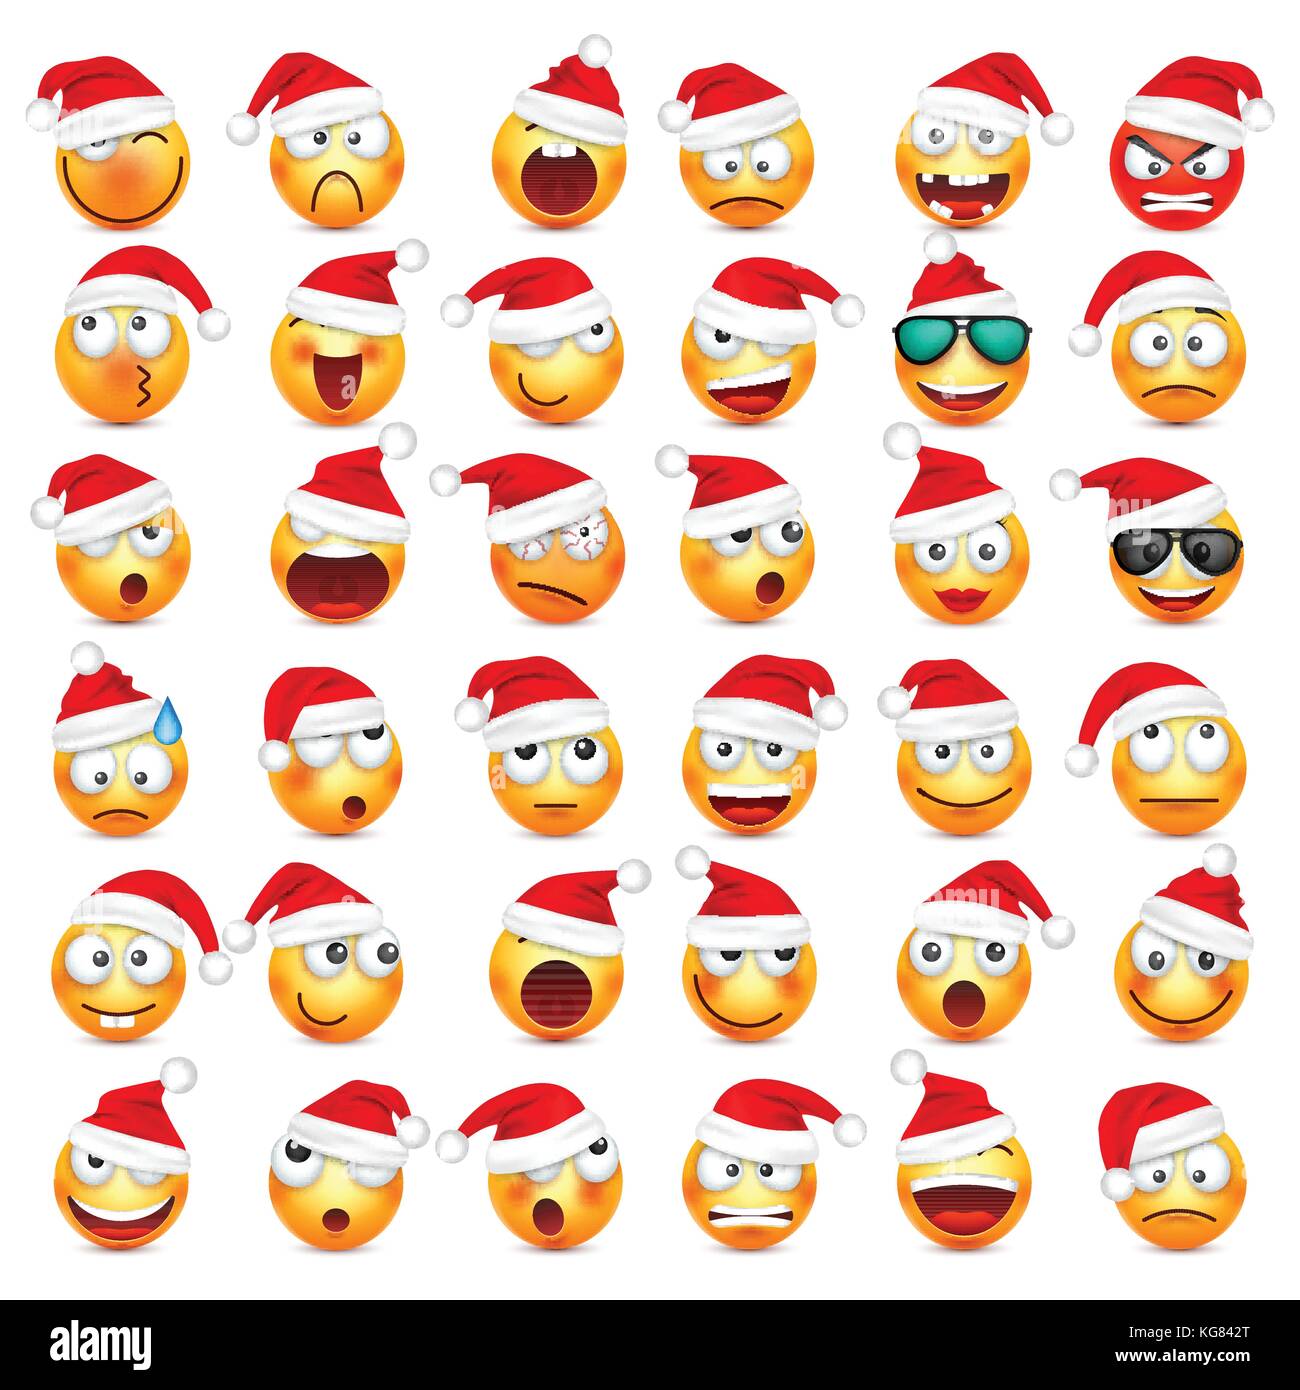 Smiley,emoticon set. Yellow face with emotions and Christmas hat. New Year, Santa.Winter emoji. Sad,happy,angry faces.Funny cartoon character.Mood. Vector. Stock Vector